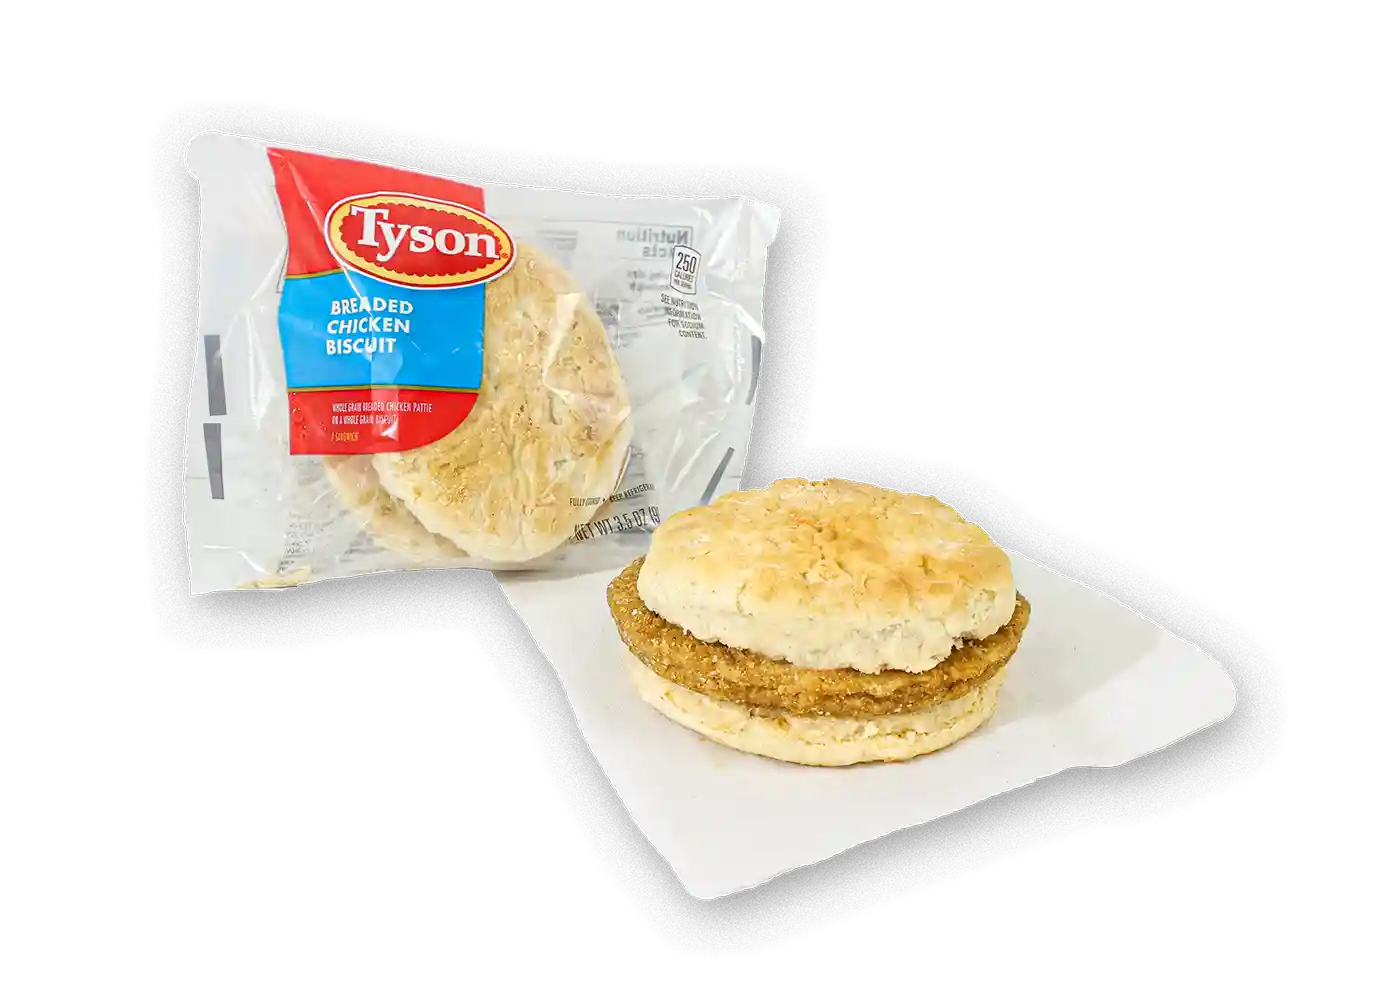 Tyson® Fully Cooked Whole Grain Breaded Chicken Patty on a Whole Grain Biscuit, 100/3.15 oz.https://images.salsify.com/image/upload/s--d_Wd6yxa--/q_25/asuihtioqheixauh6uam.webp